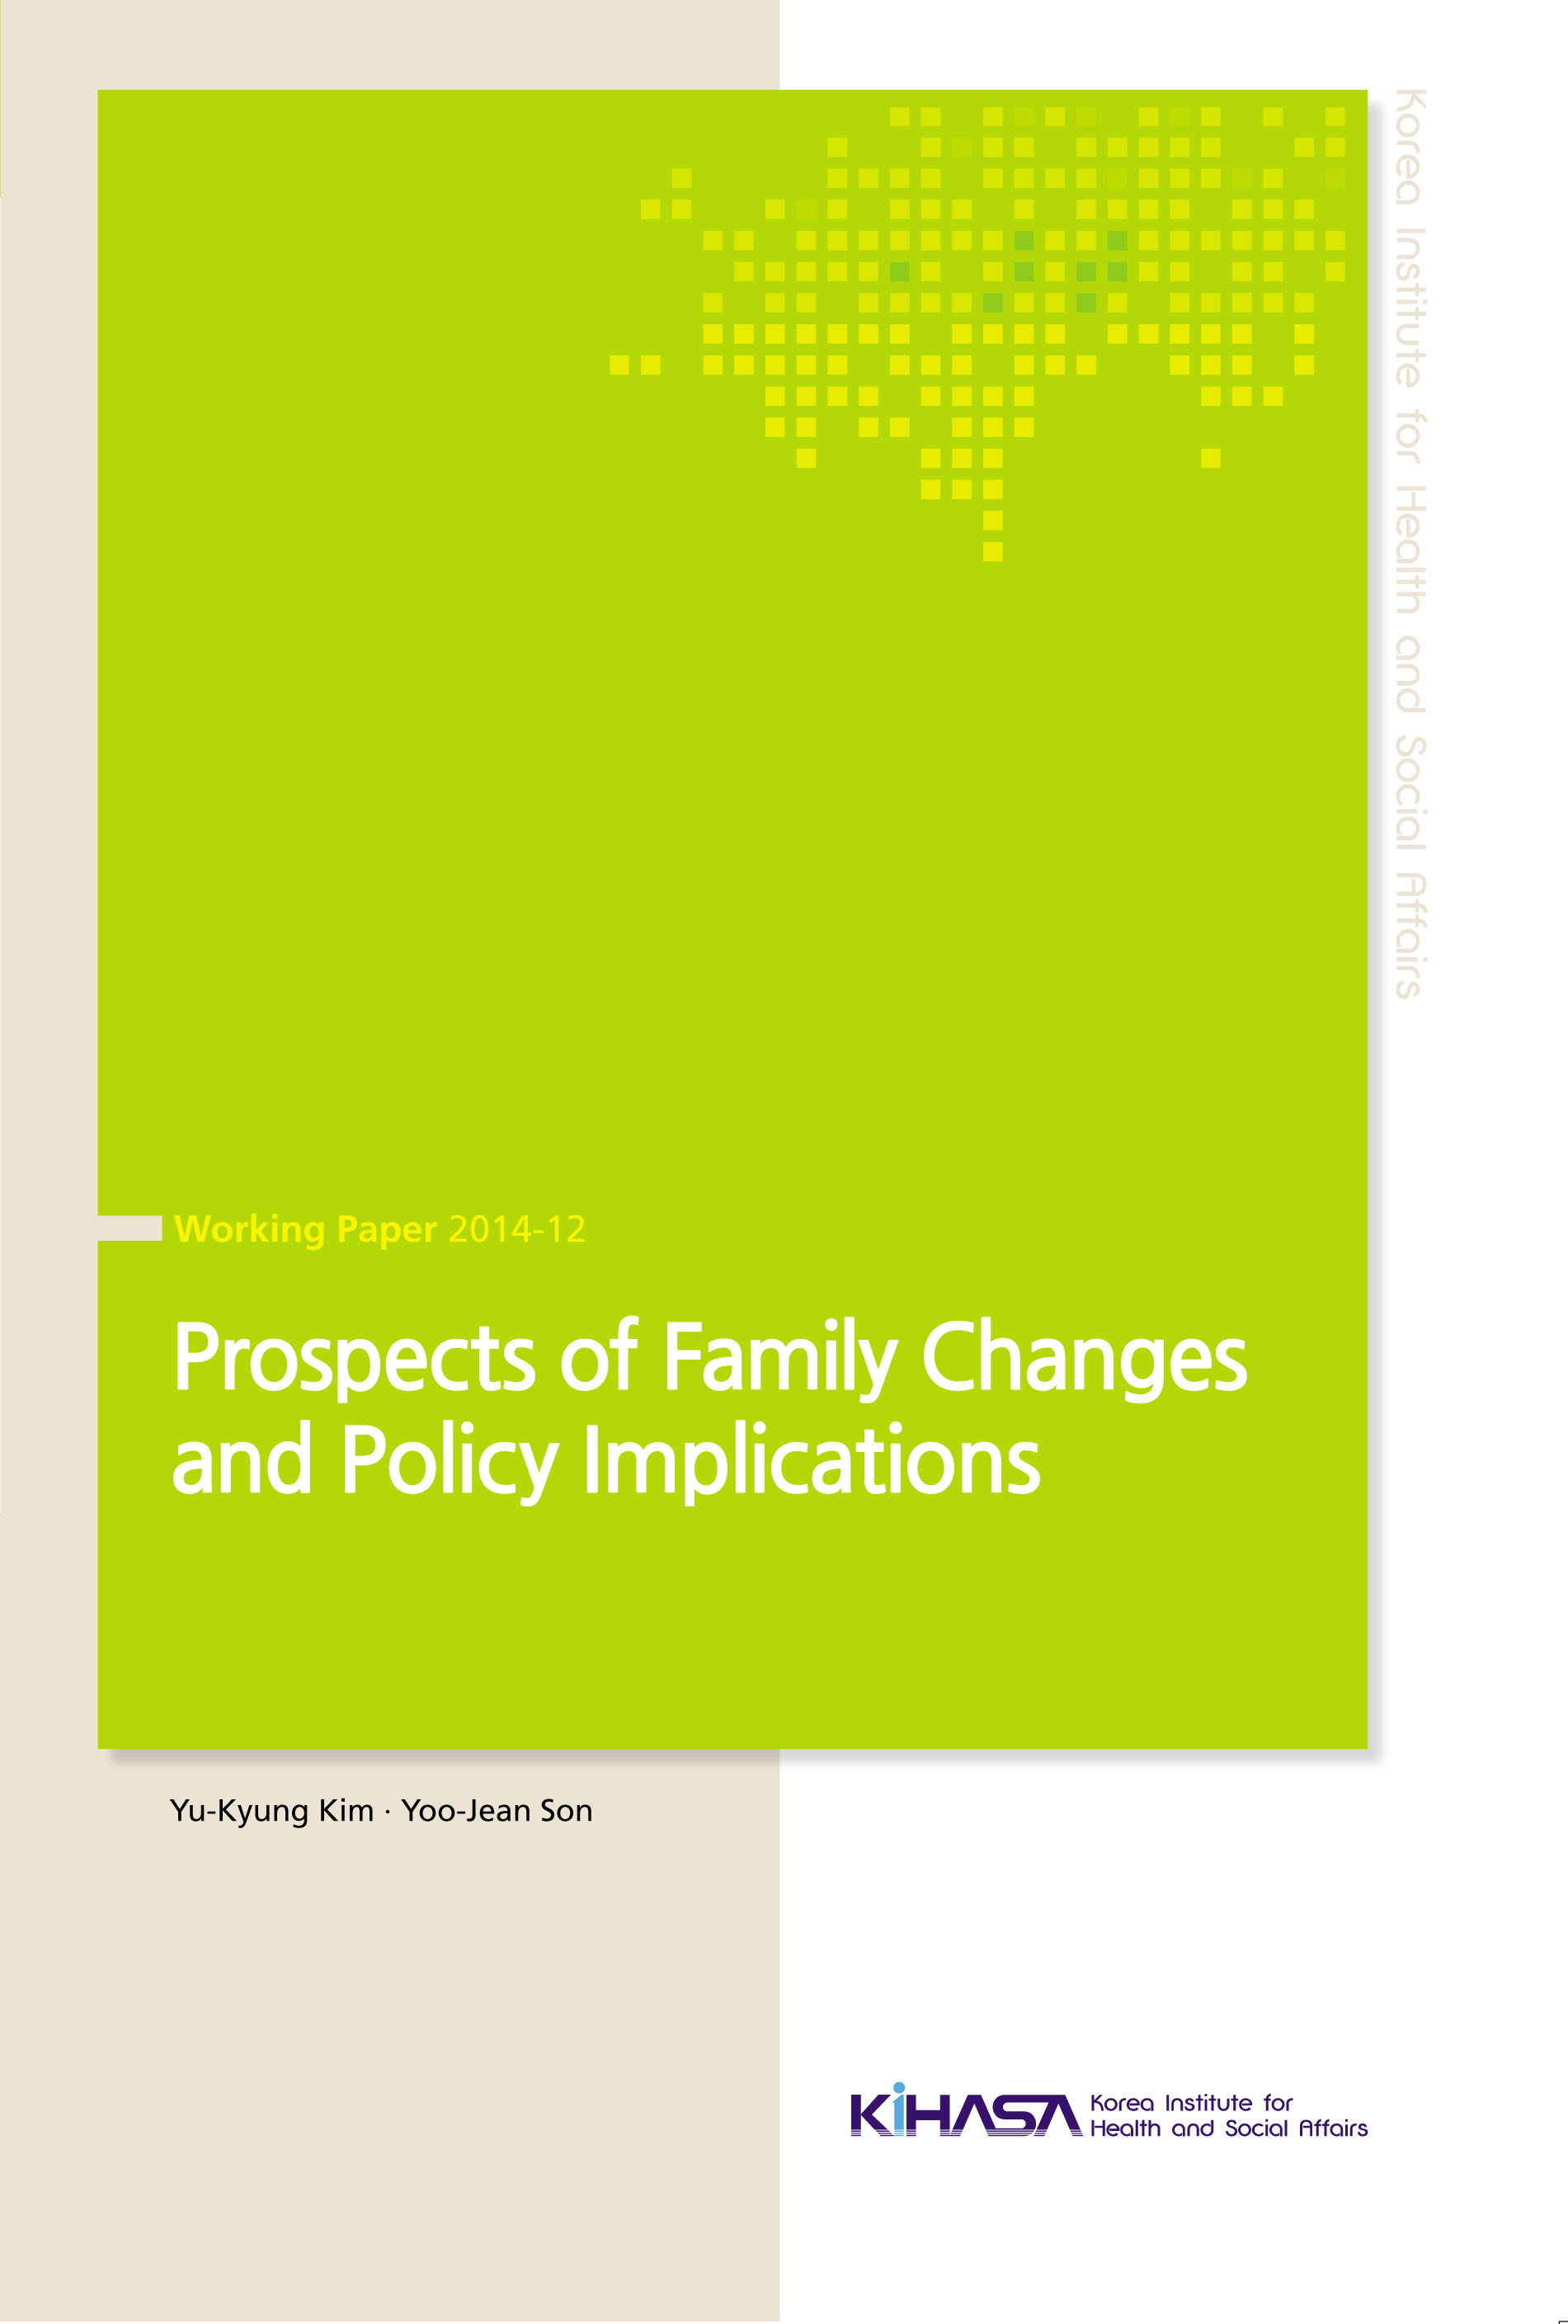 Prospects of Family Changes and Policy Implications